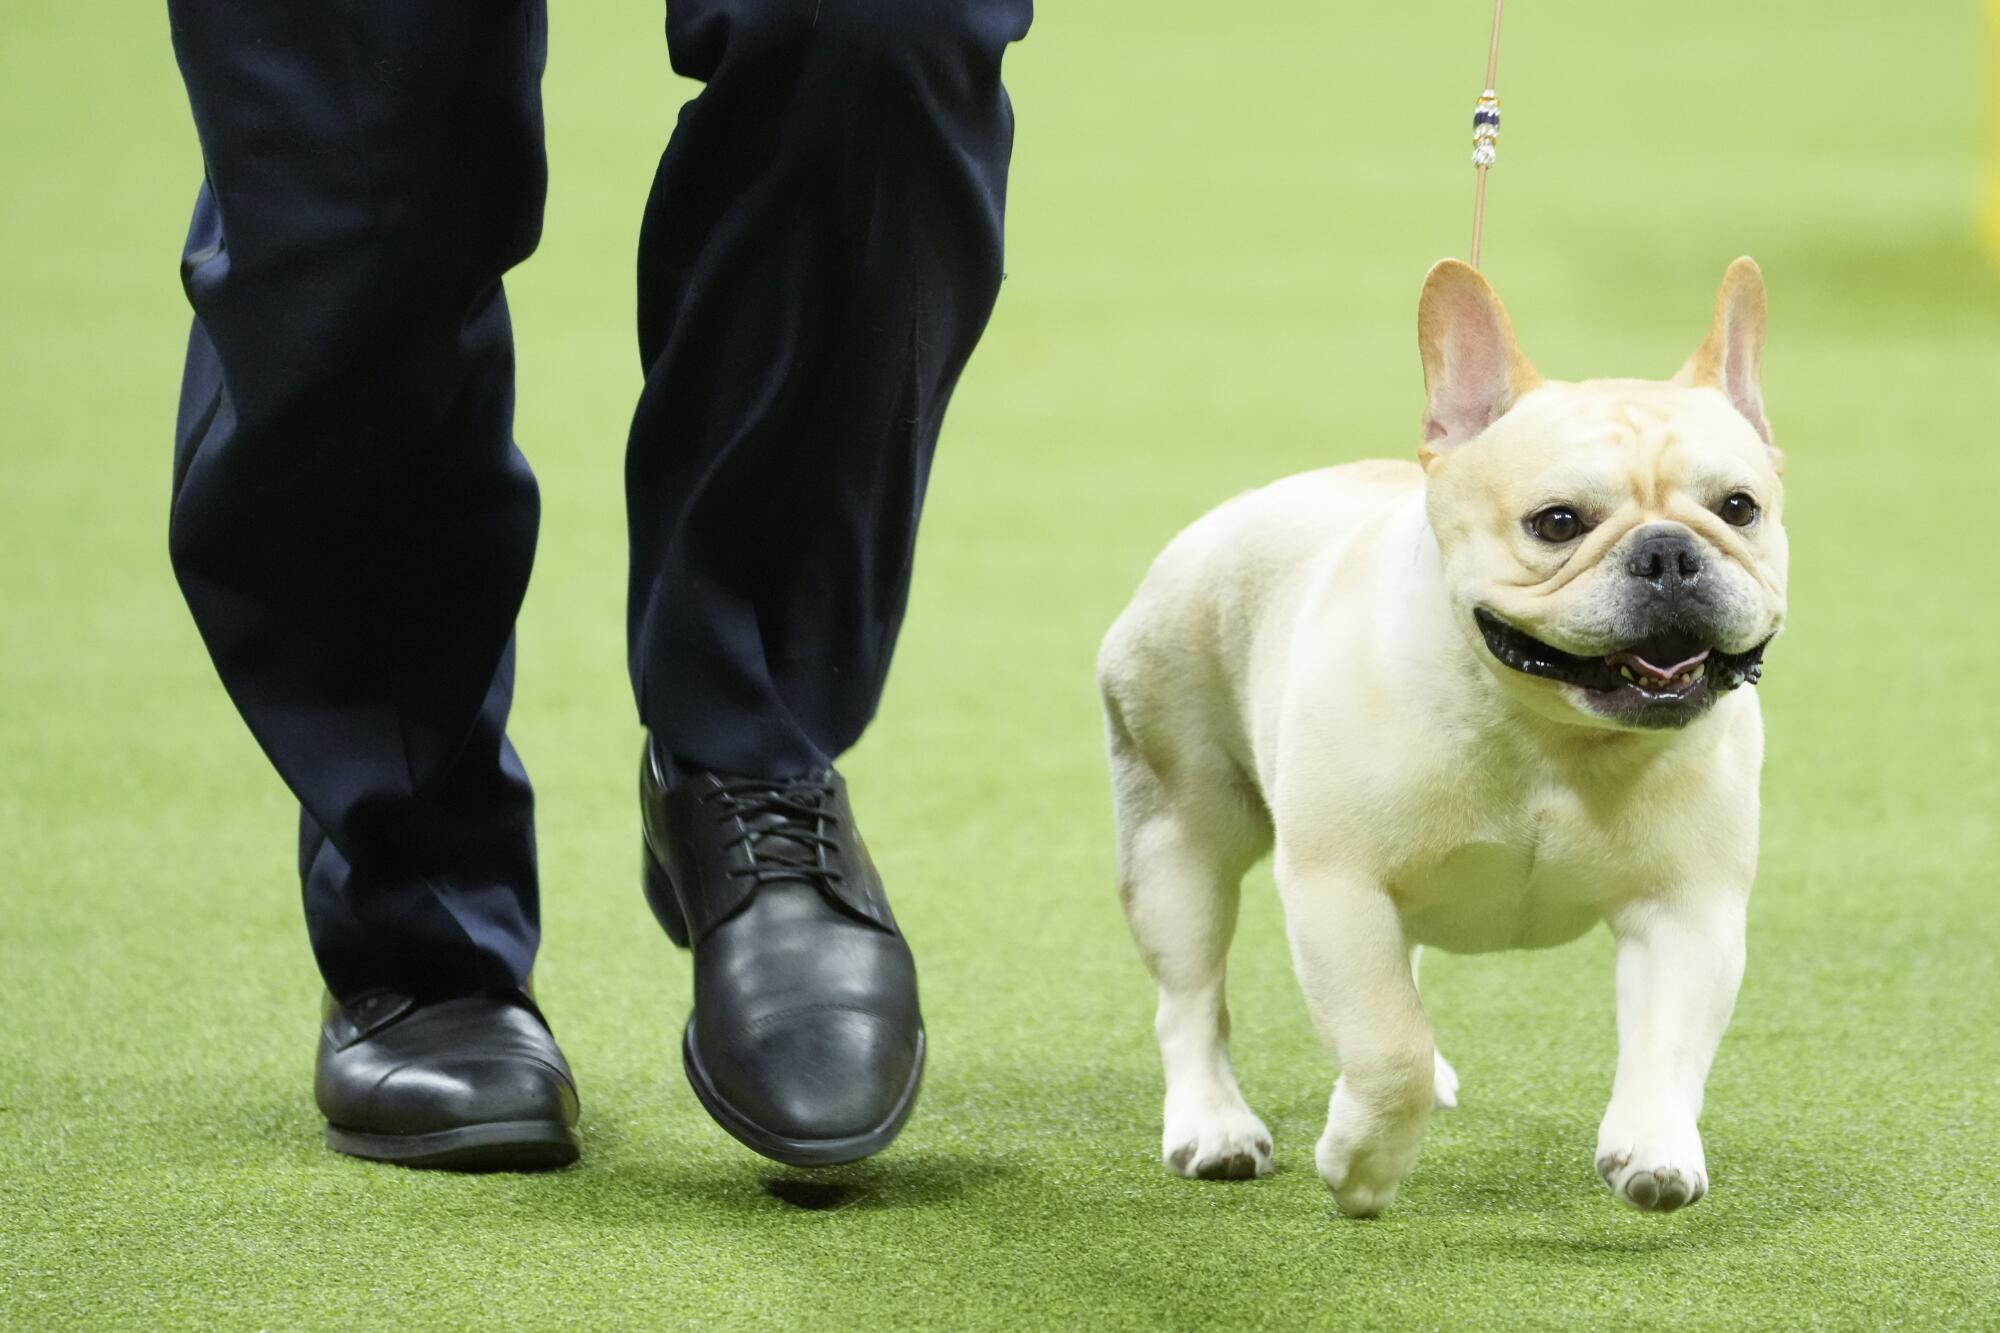 Buddy Holly wins top prize at Westminster dog show - Los Angeles Times